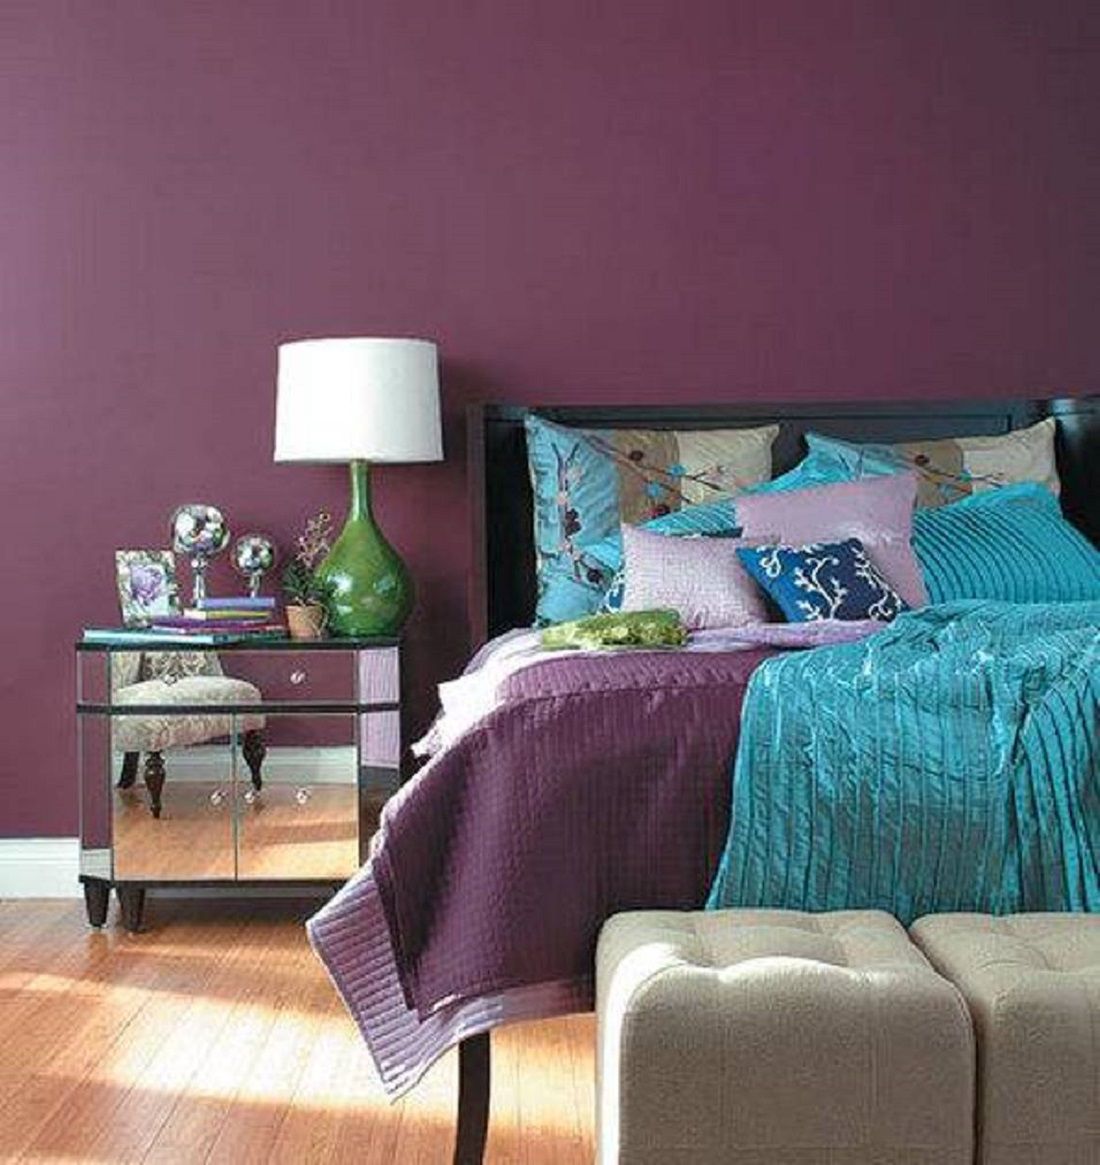 Purple walls in a sophisticated bedroom.